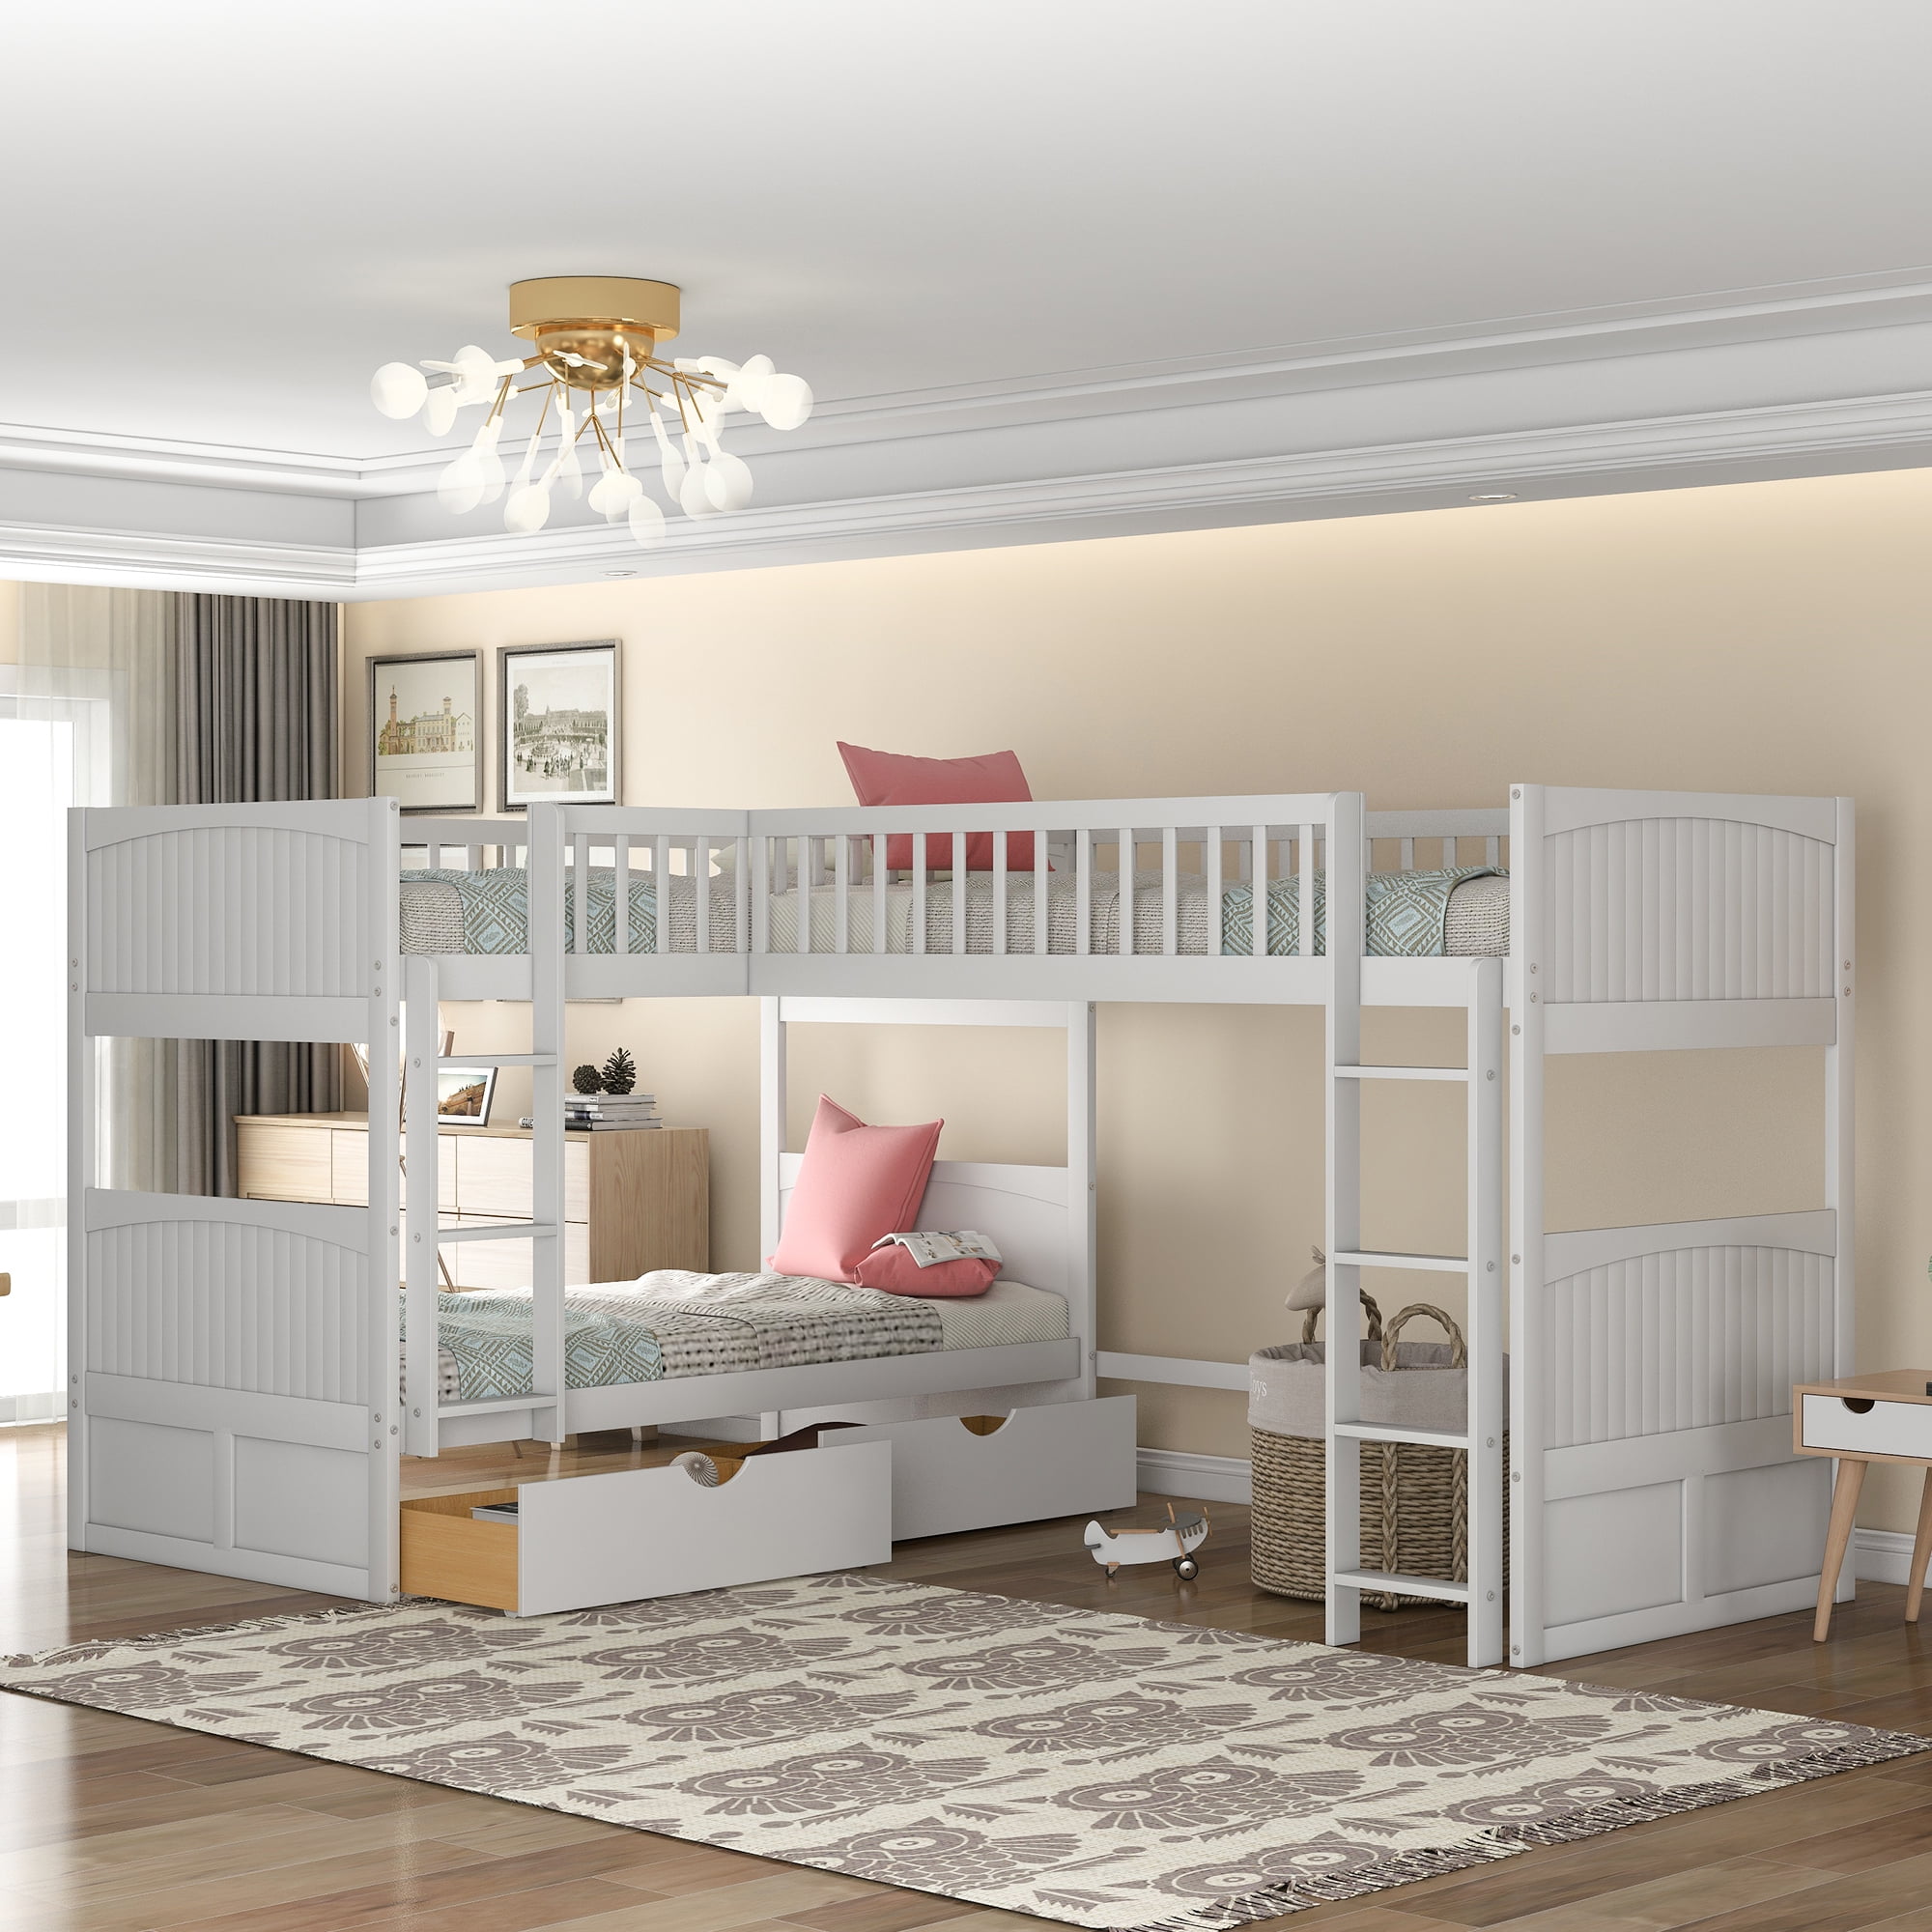 Euroco Twin Size L Shaped Wood Triple, L Shaped Triple Bunk Bed Twin Over Full Size Beds